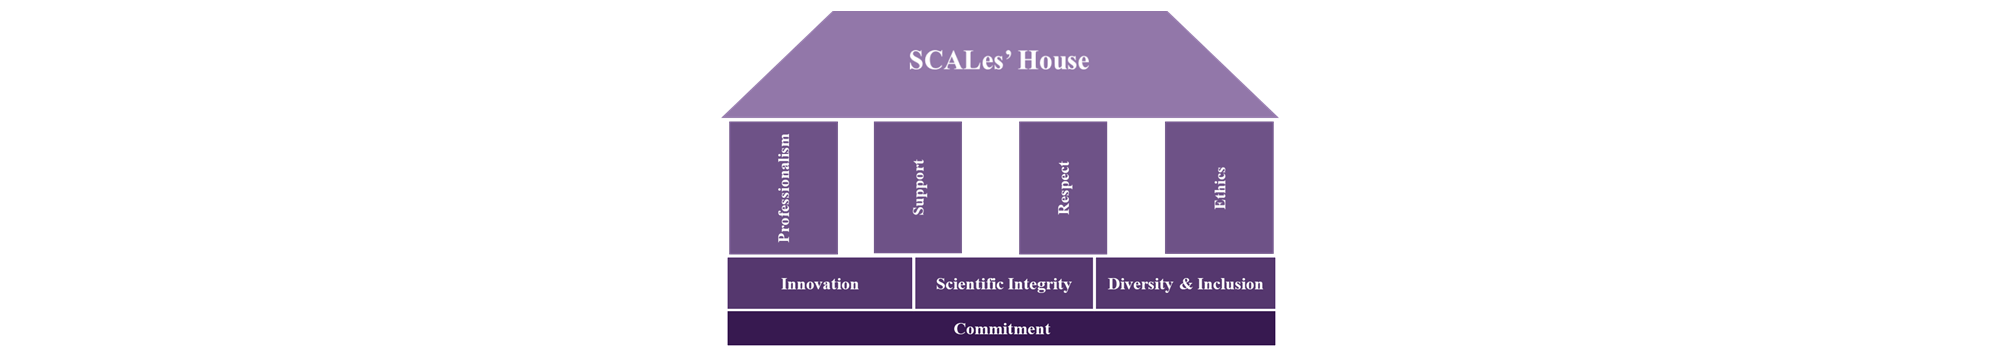 The SCALes House Graphic: Jean Ribert Francois (2021)